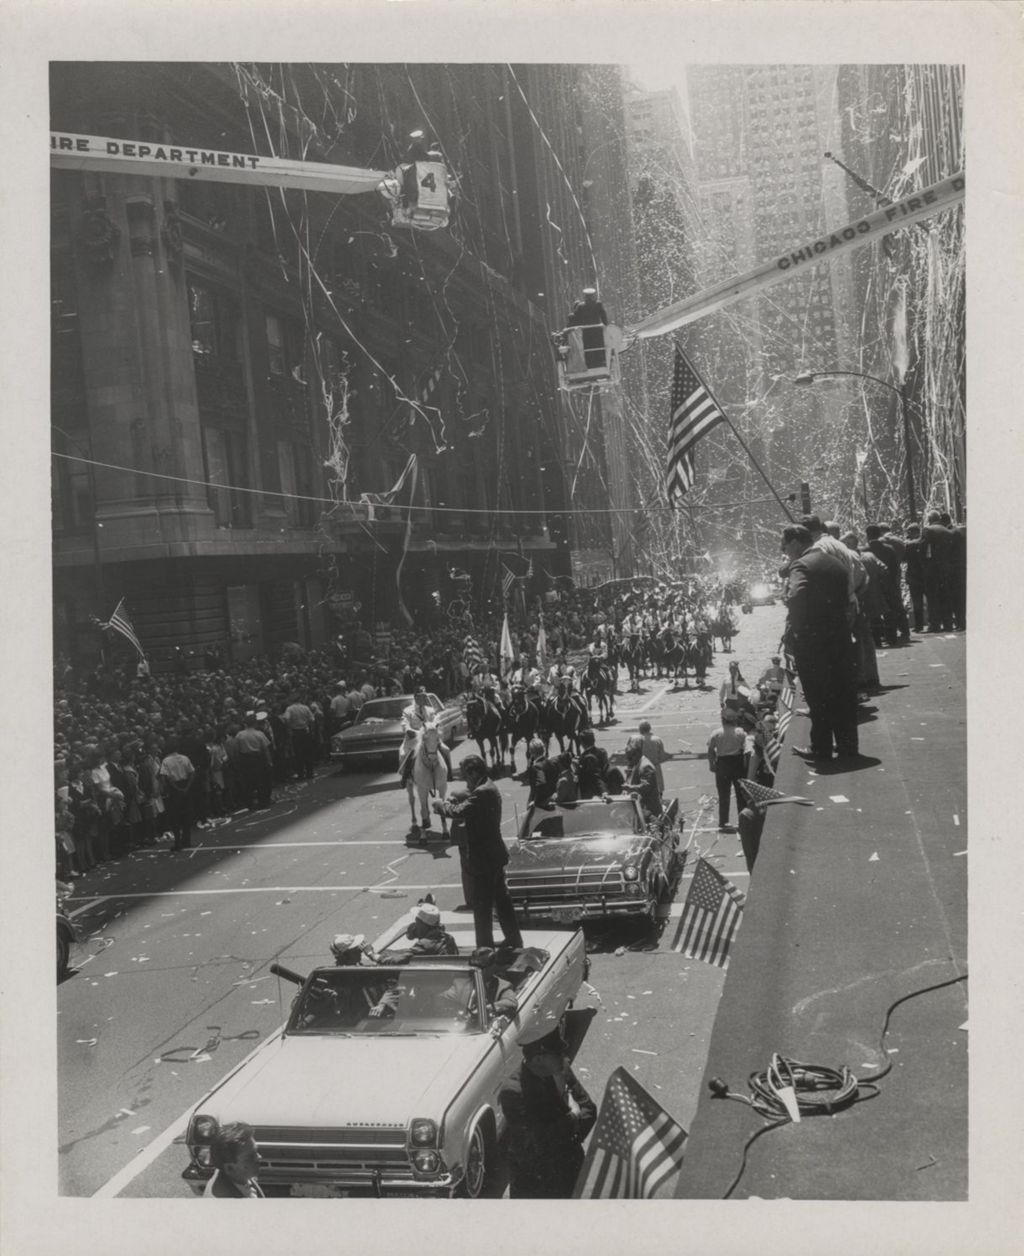 Miniature of Edward H. White, Hubert Humphrey and James McDivitt in a parade for the astronauts